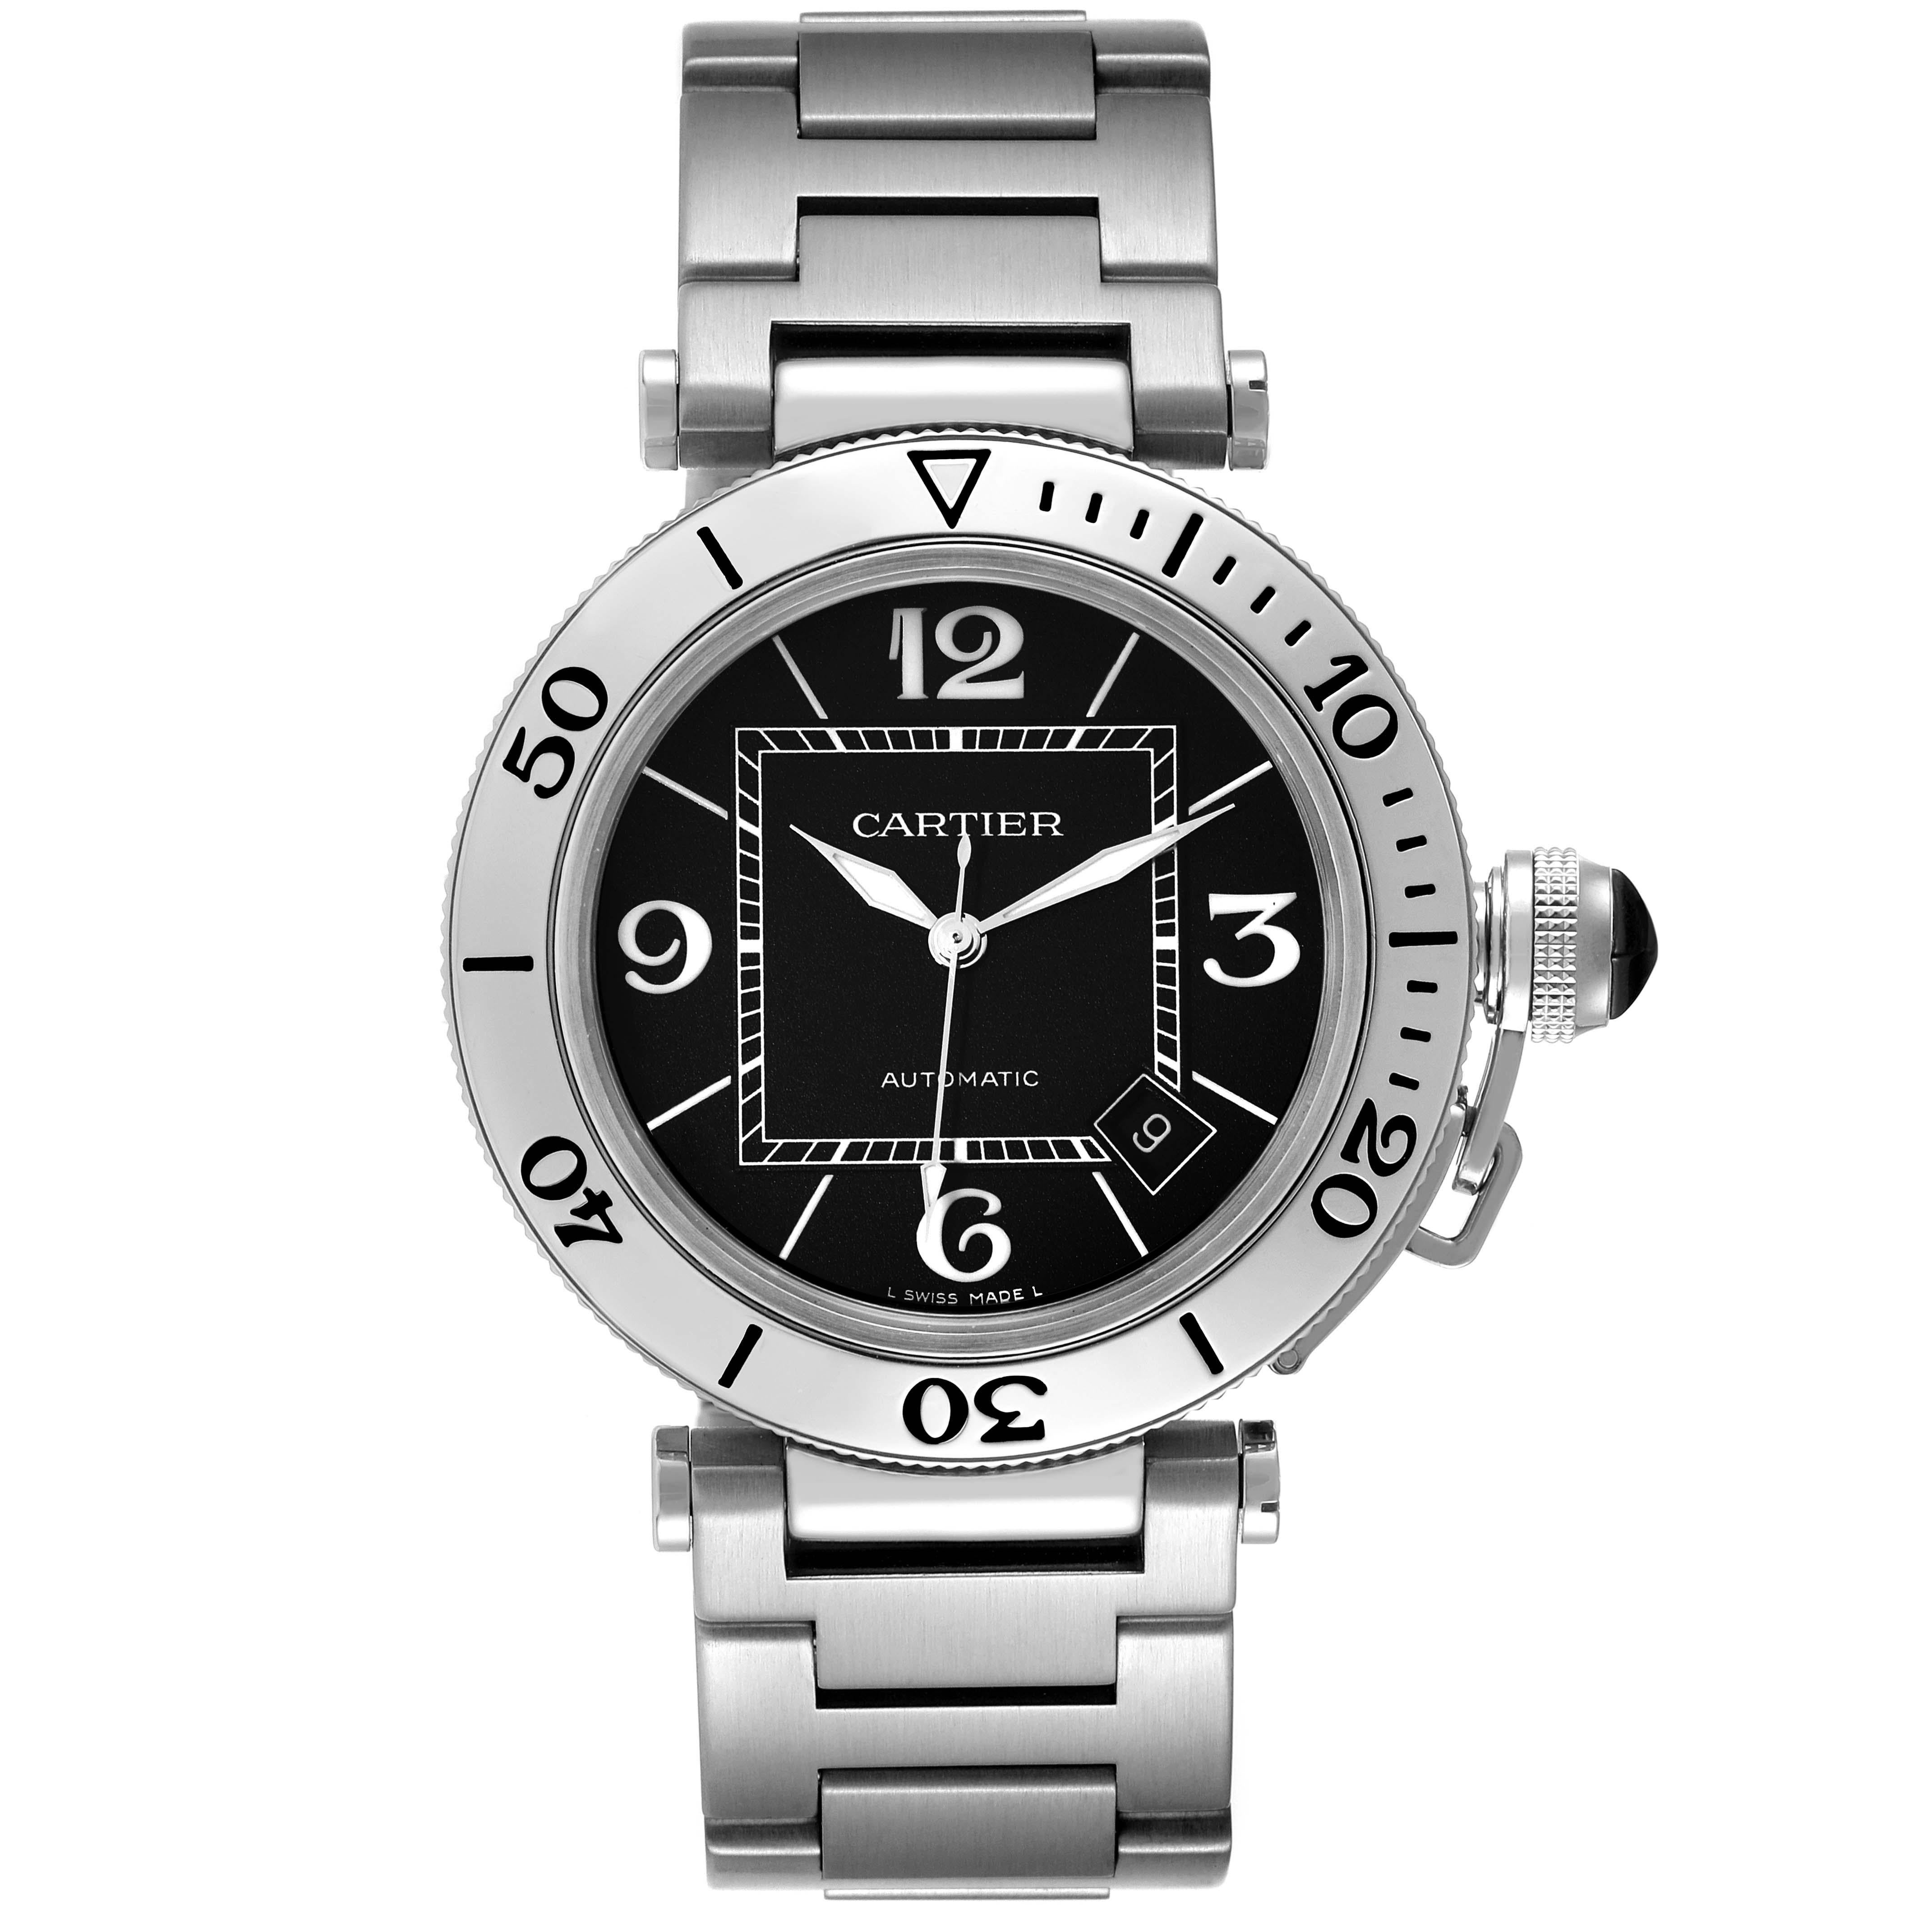 Cartier Pasha Seatimer Black Dial Automatic Steel Mens Watch W31077M7. Automatic self-winding movement. Caliber 049. Round stainless steel case 40.5 mm in diameter. Includes a screw down crown cover with a faceted black ceramic cabochon.